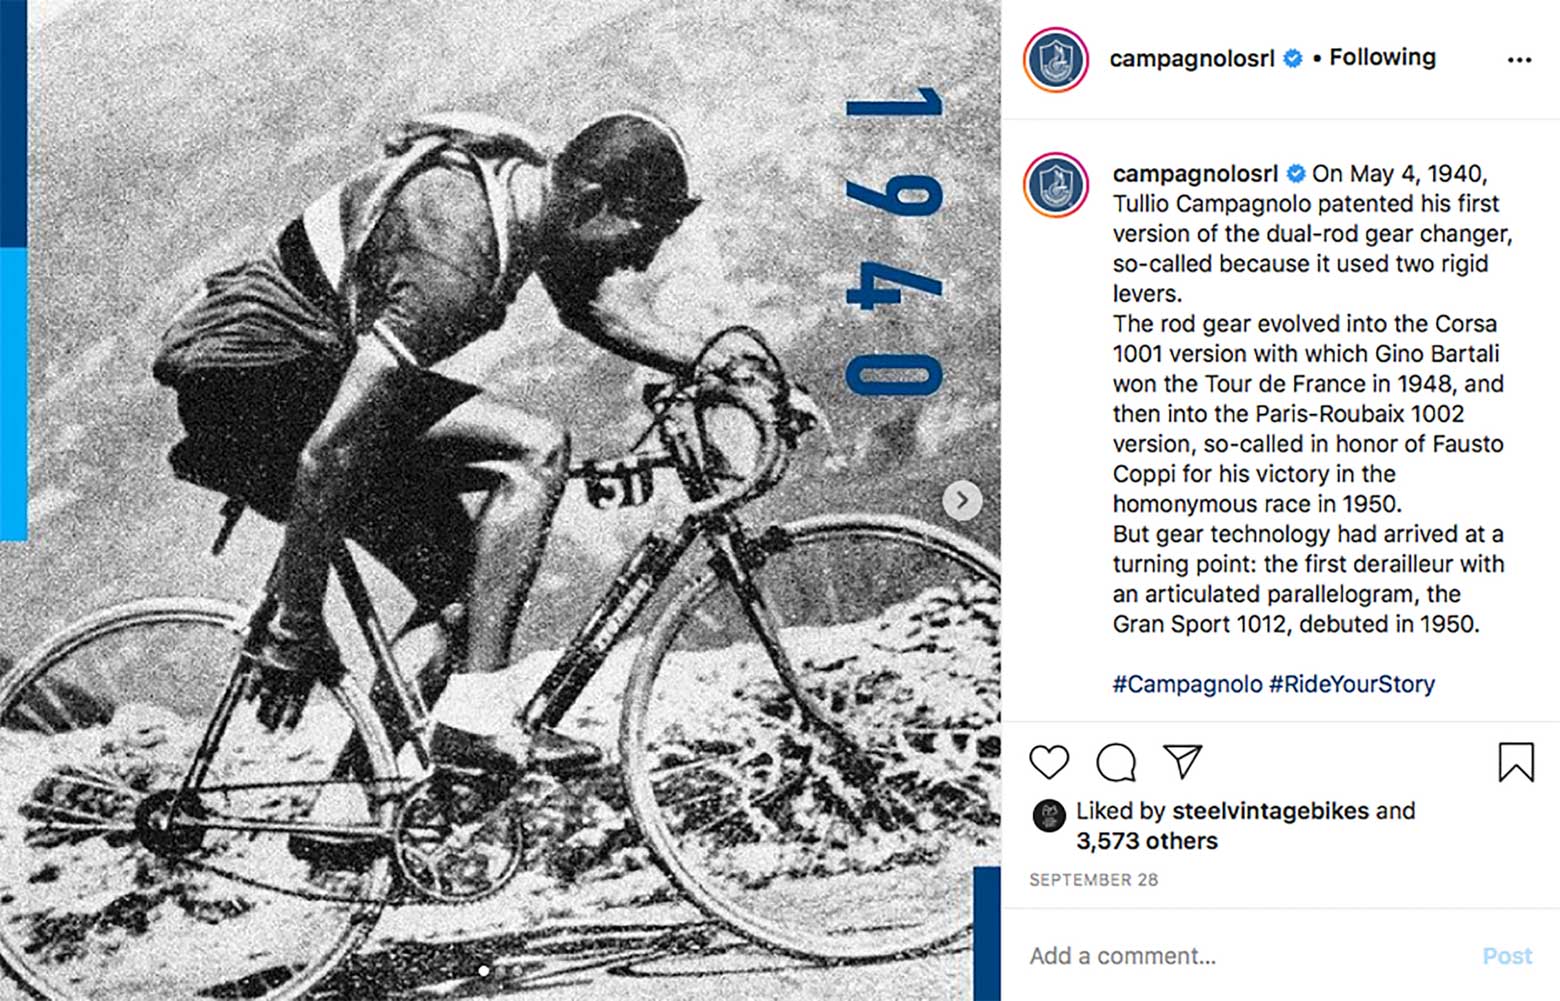 Campagnolo - Instagram history image 03 main image